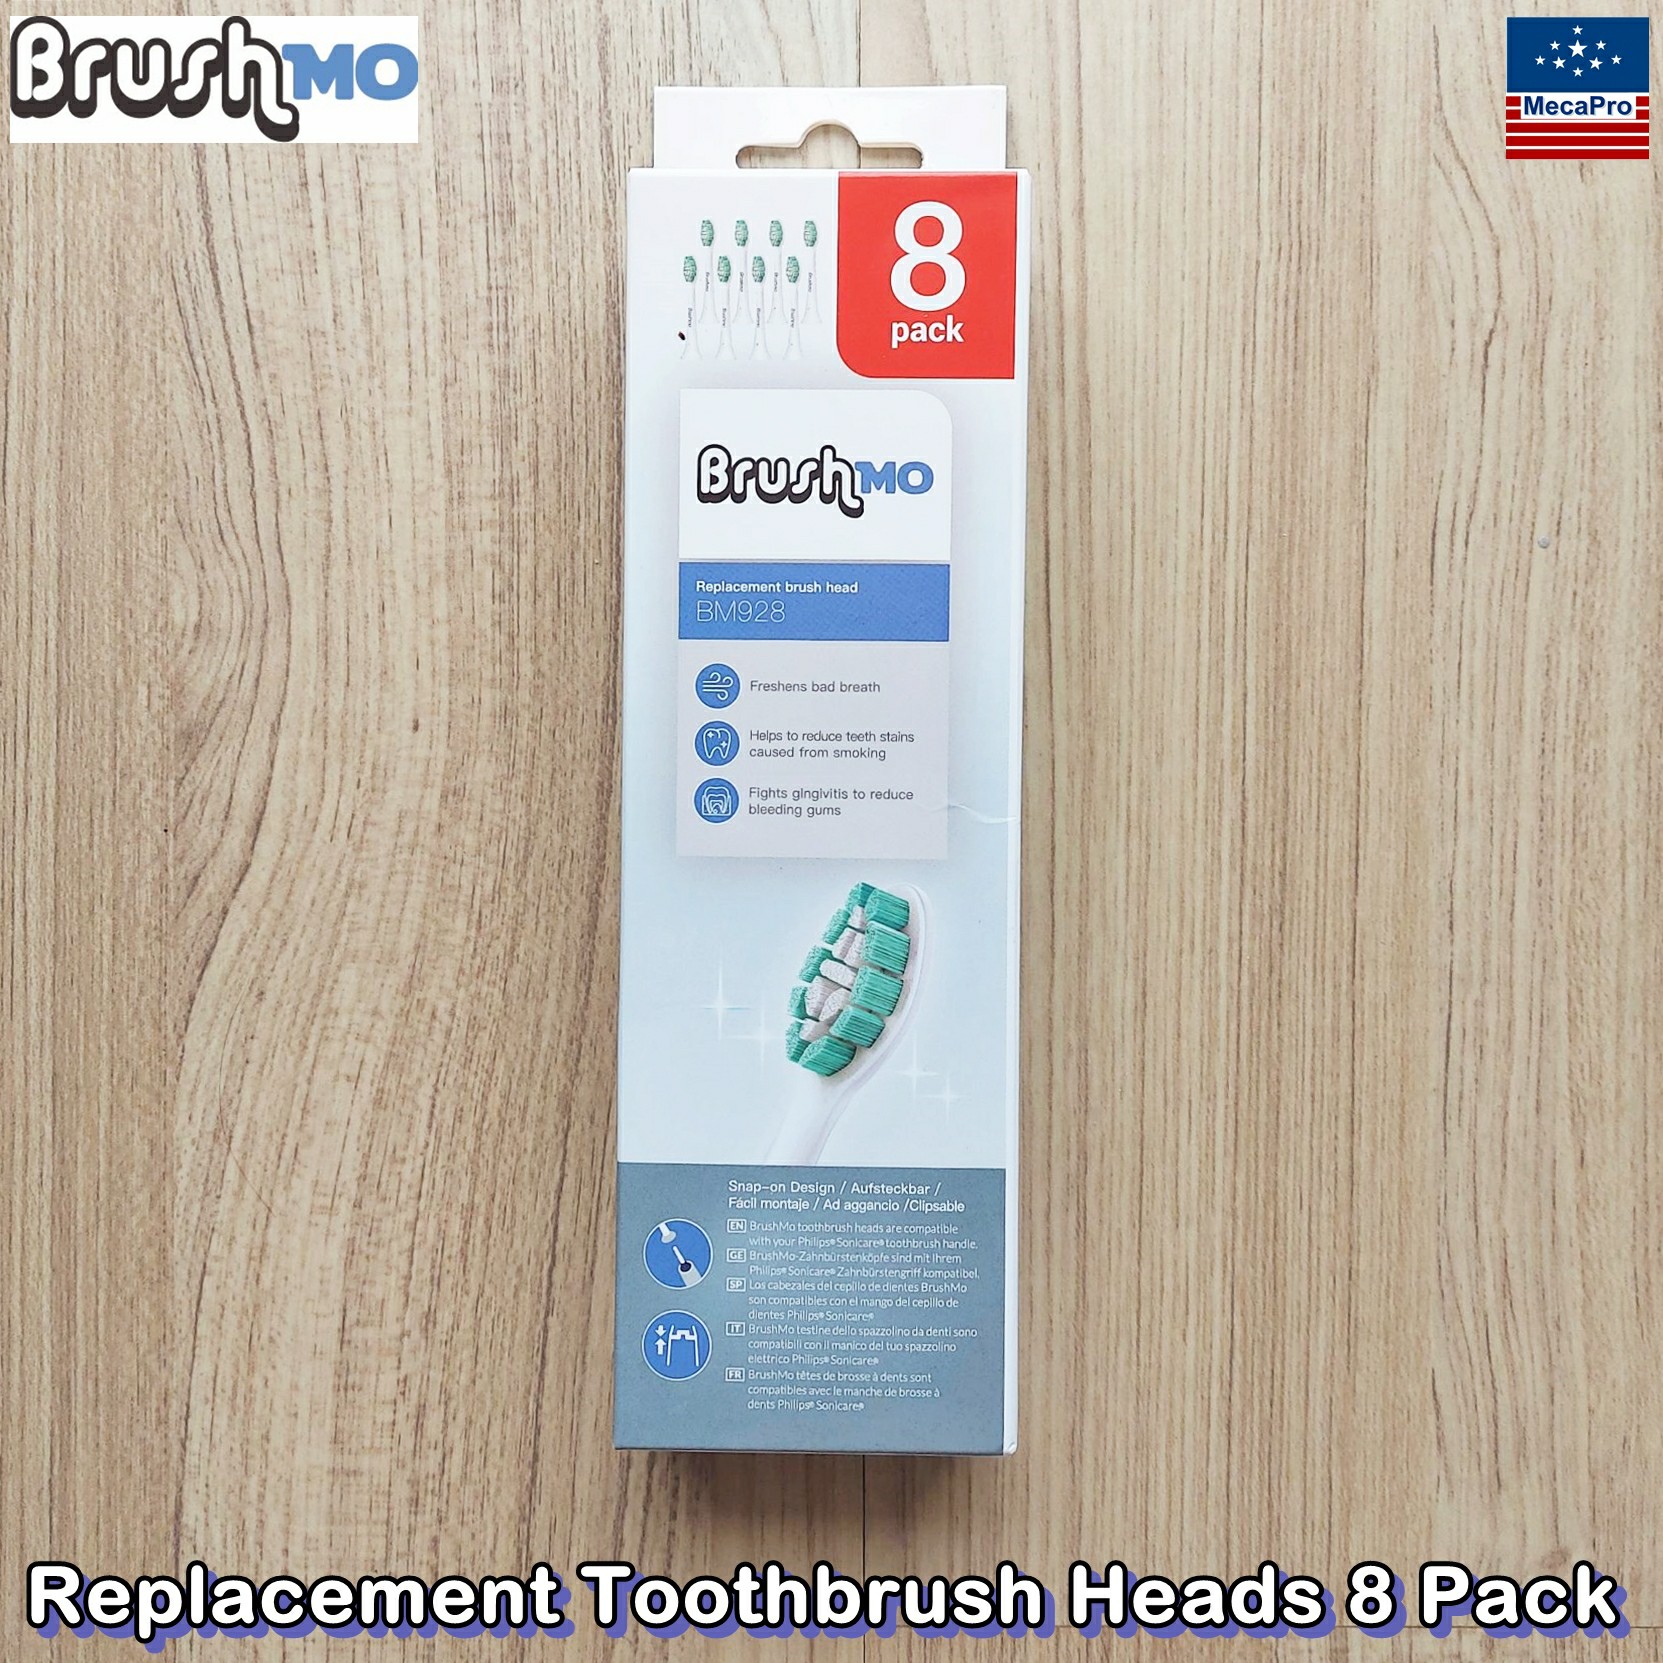 Brushmo Replacement Toothbrush Heads 8 Pack หัวแปรงสีฟันไฟฟ้า ใช้กับแปรงสีฟันไฟฟ้า Phillips Sonicare ได้